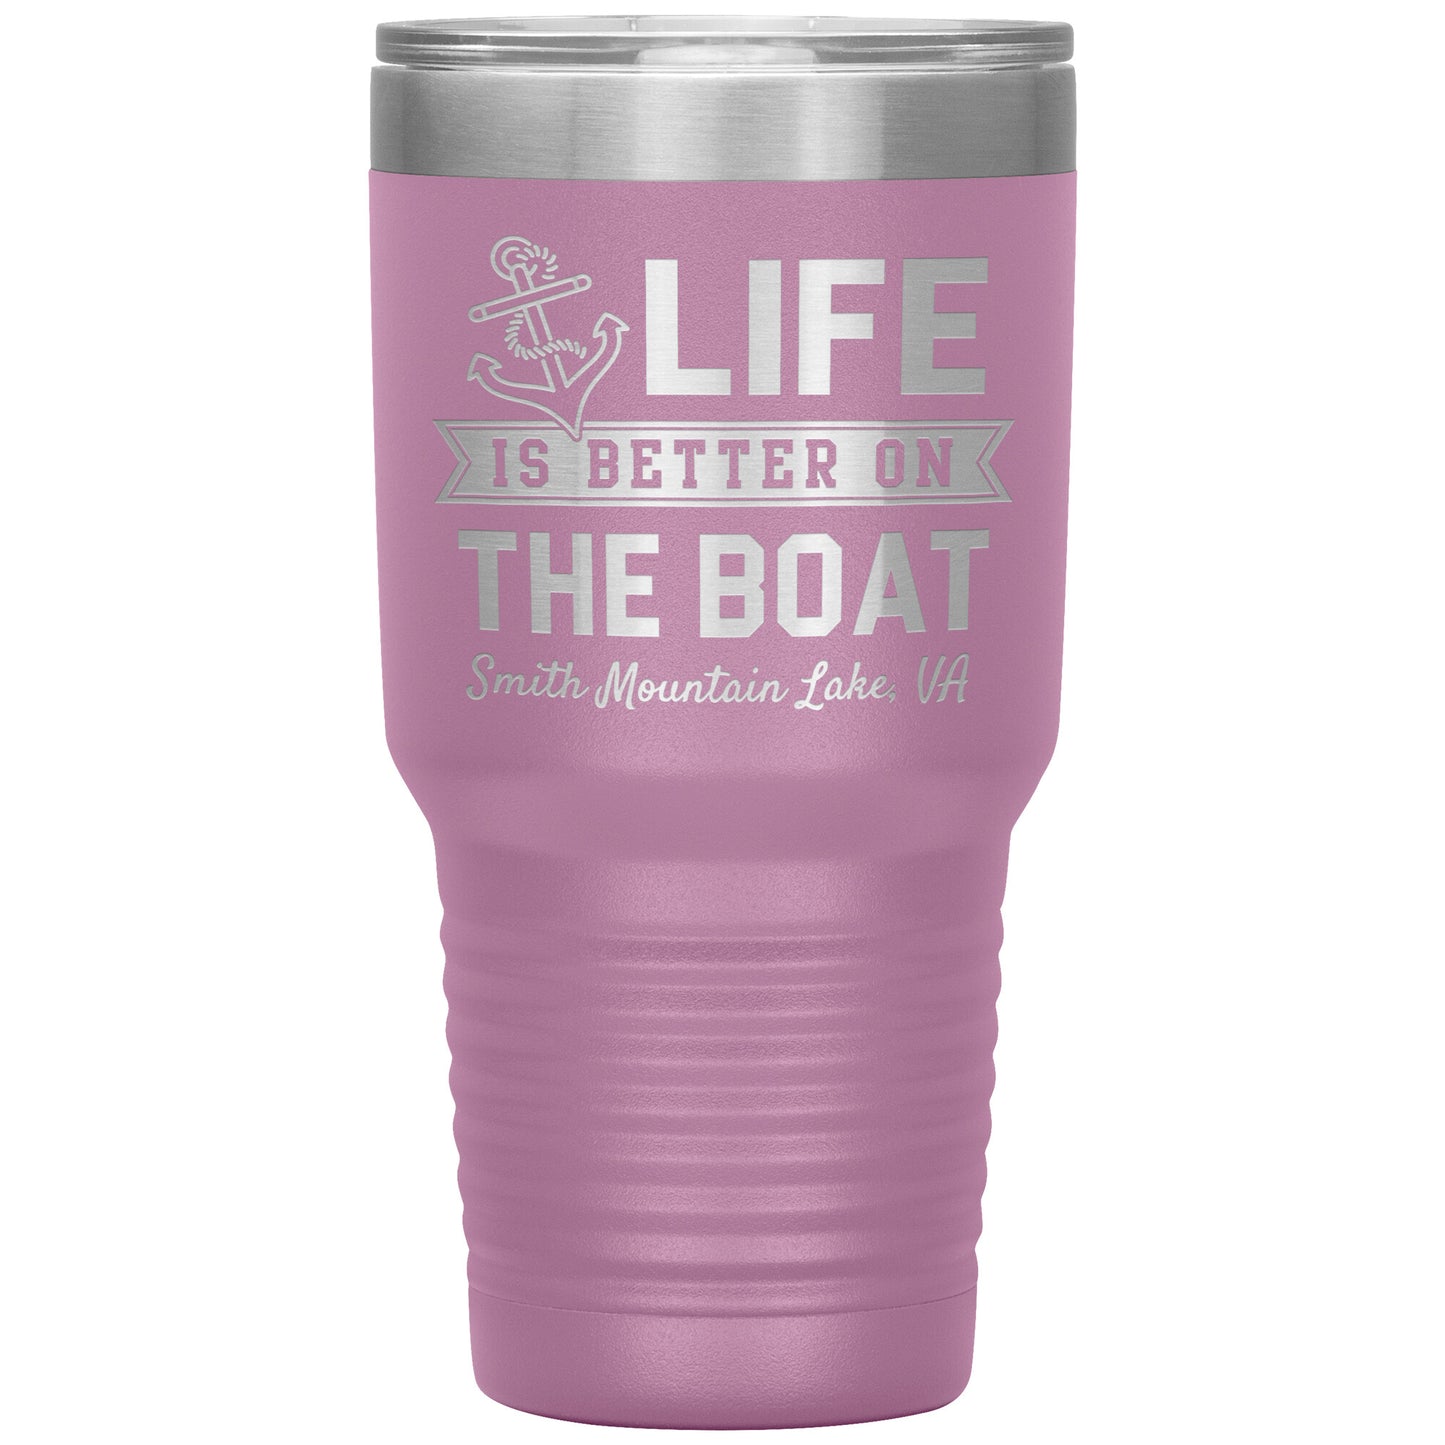 Life is Better on the Boat - Smith Mountain Lake, VA - Laser Etched Drink Tumbler